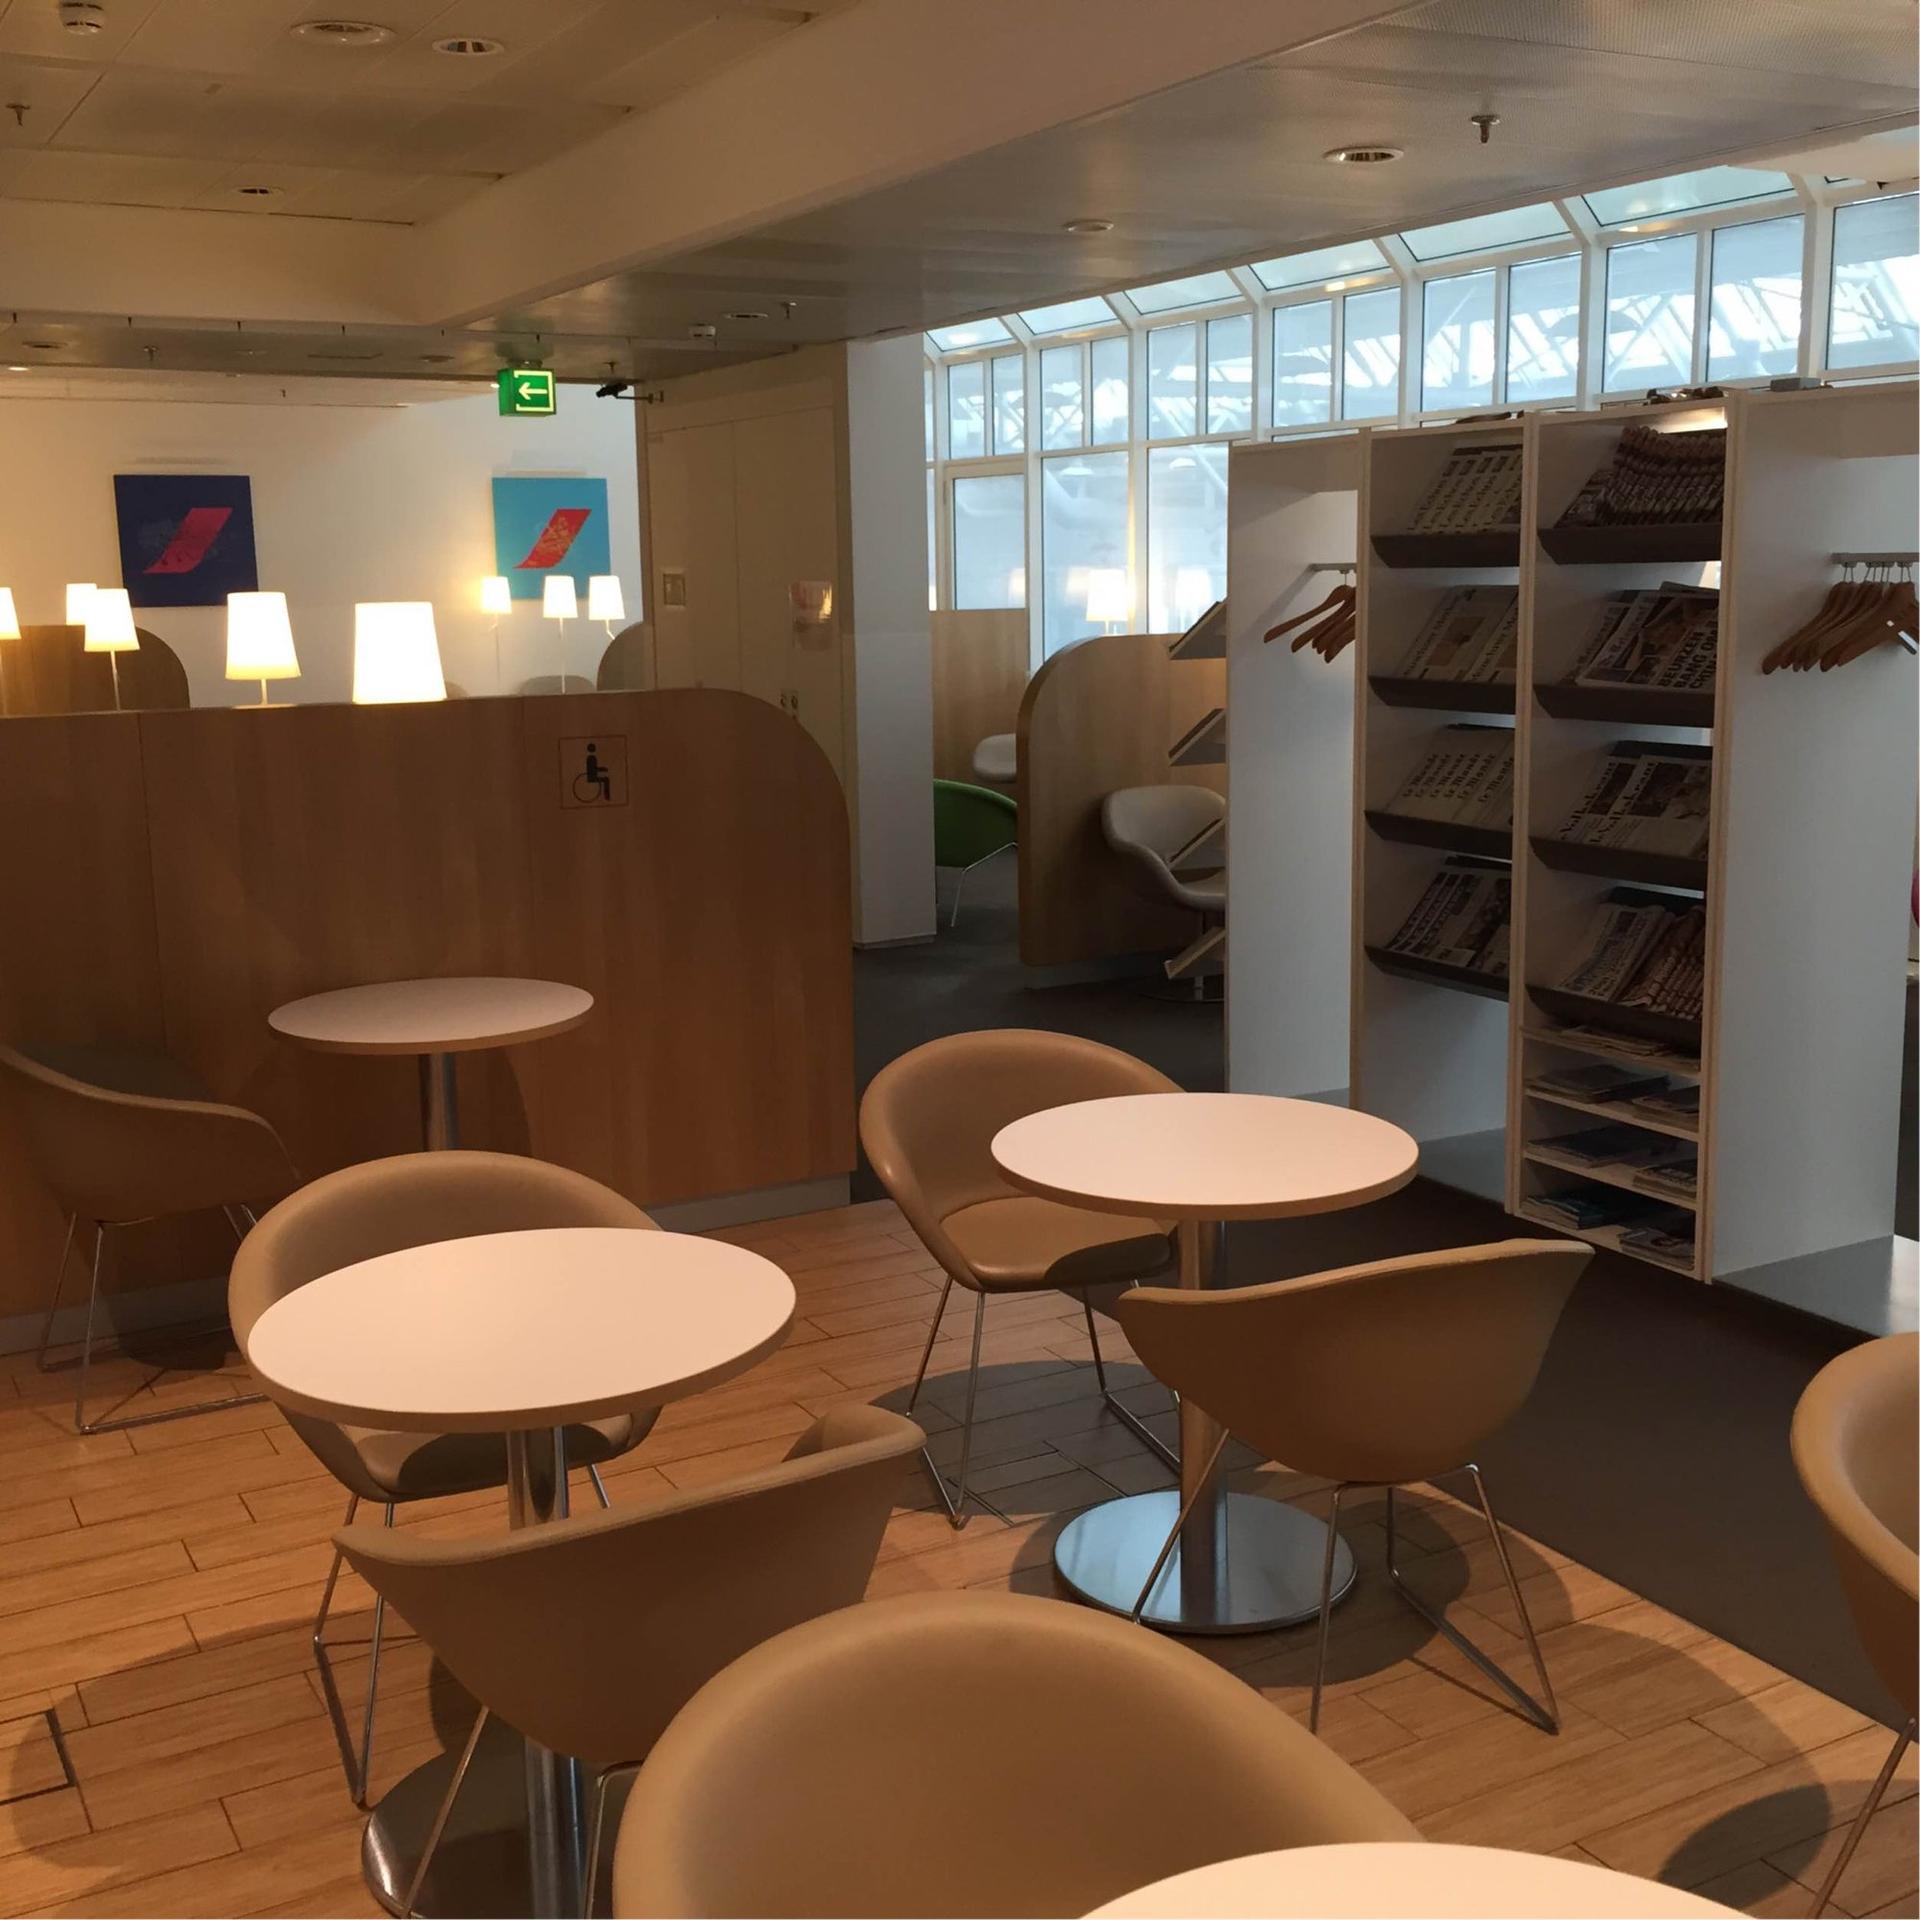 Air France Lounge image 2 of 3